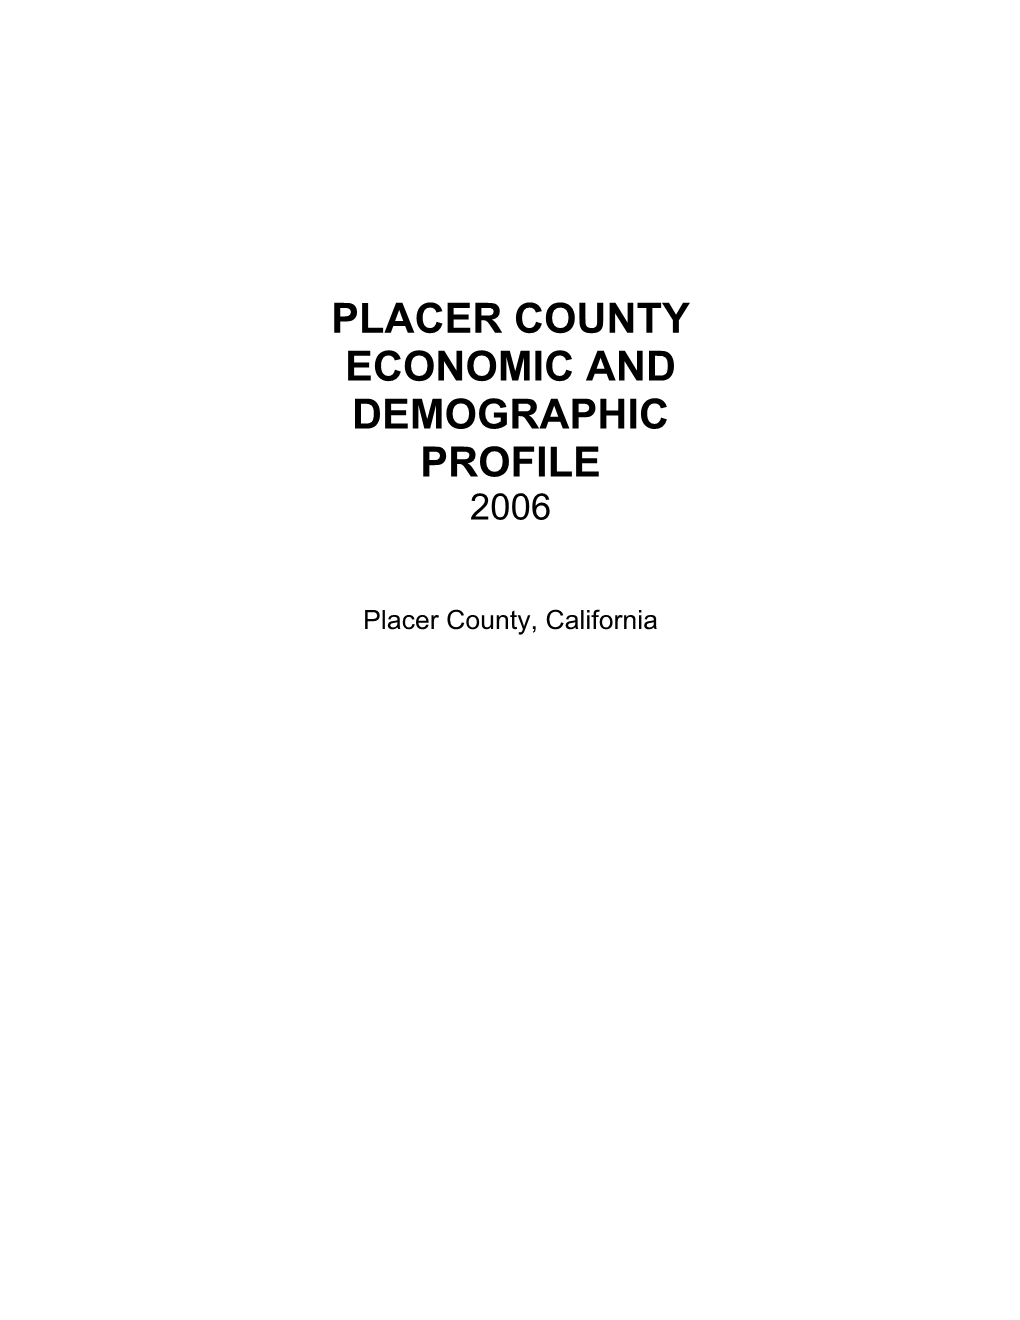 Placer County Economic and Demographic Profile 2006